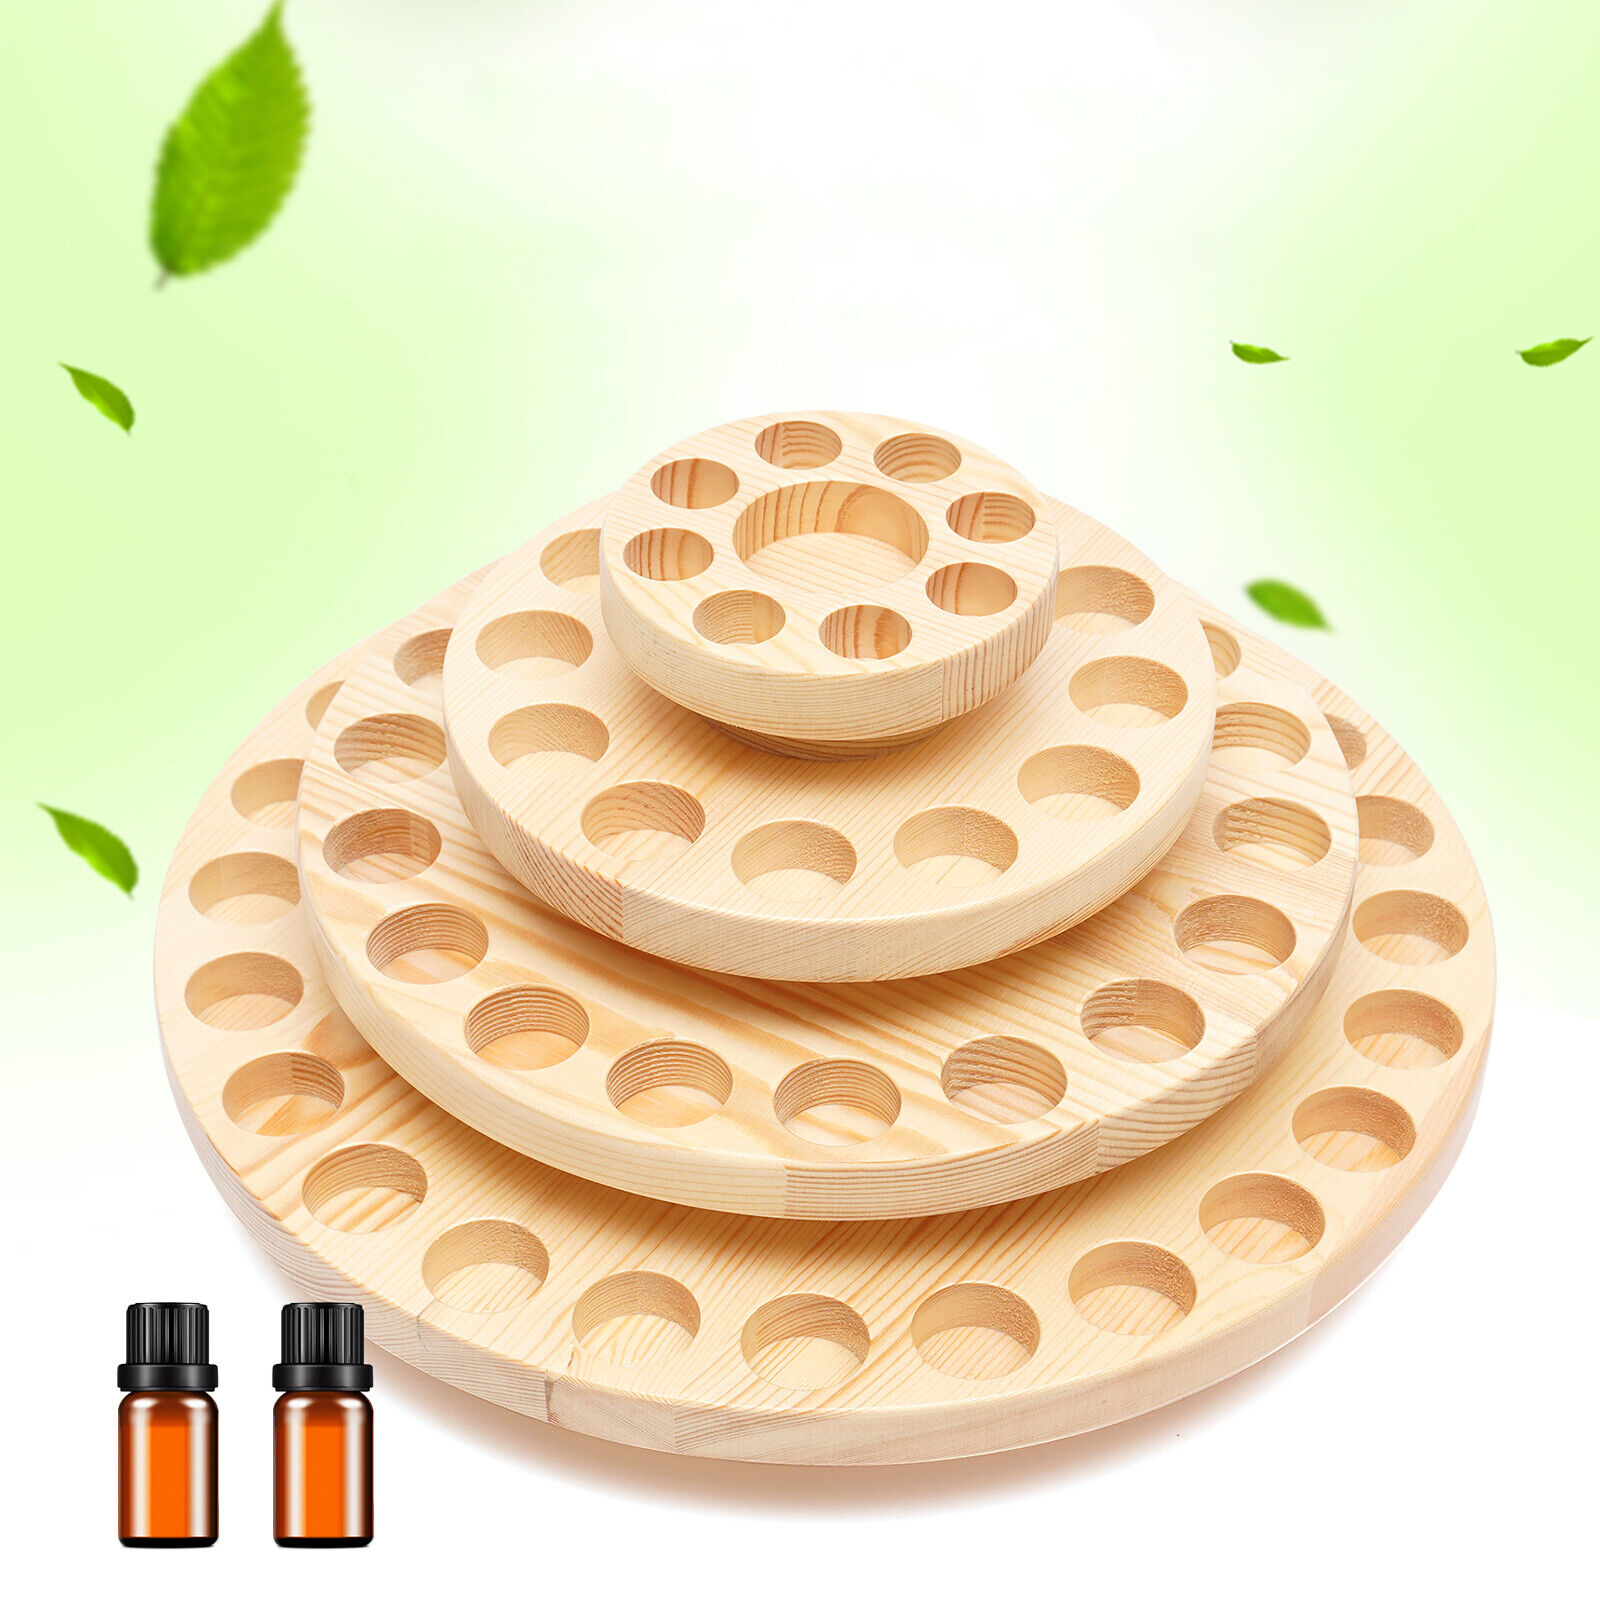 63 Slots Rotating Essential Oil Bottle Holder Display Stand Wooden Storage Rack Unbranded Does Not Apply